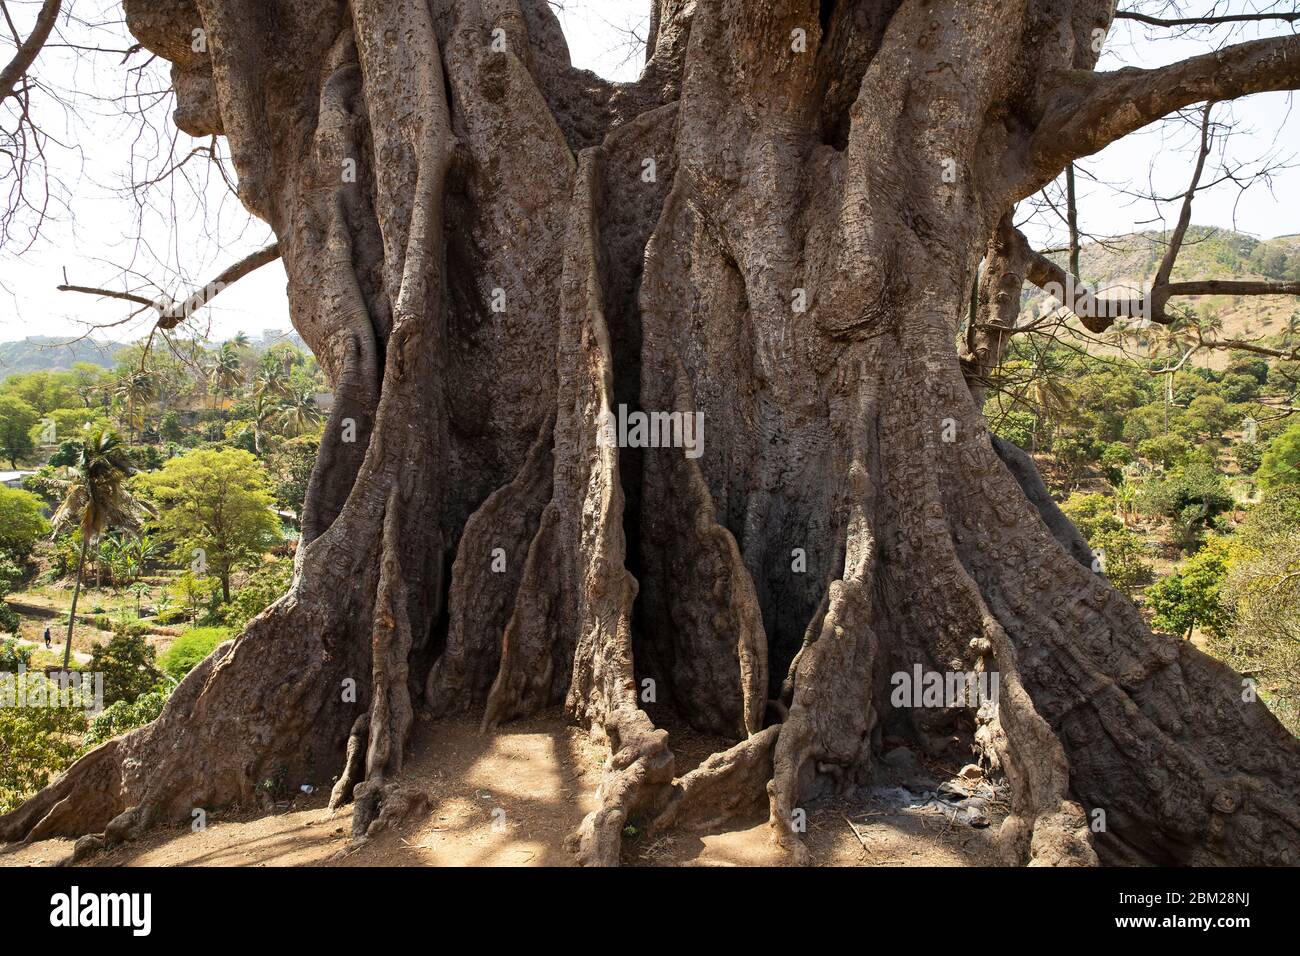 Trunk and buttress roots of 25 meter high kapok (Ceiba pentandra), highest tree in Cape Verde / Cabo Verde near Boa Entrada on the island Santiago Stock Photo